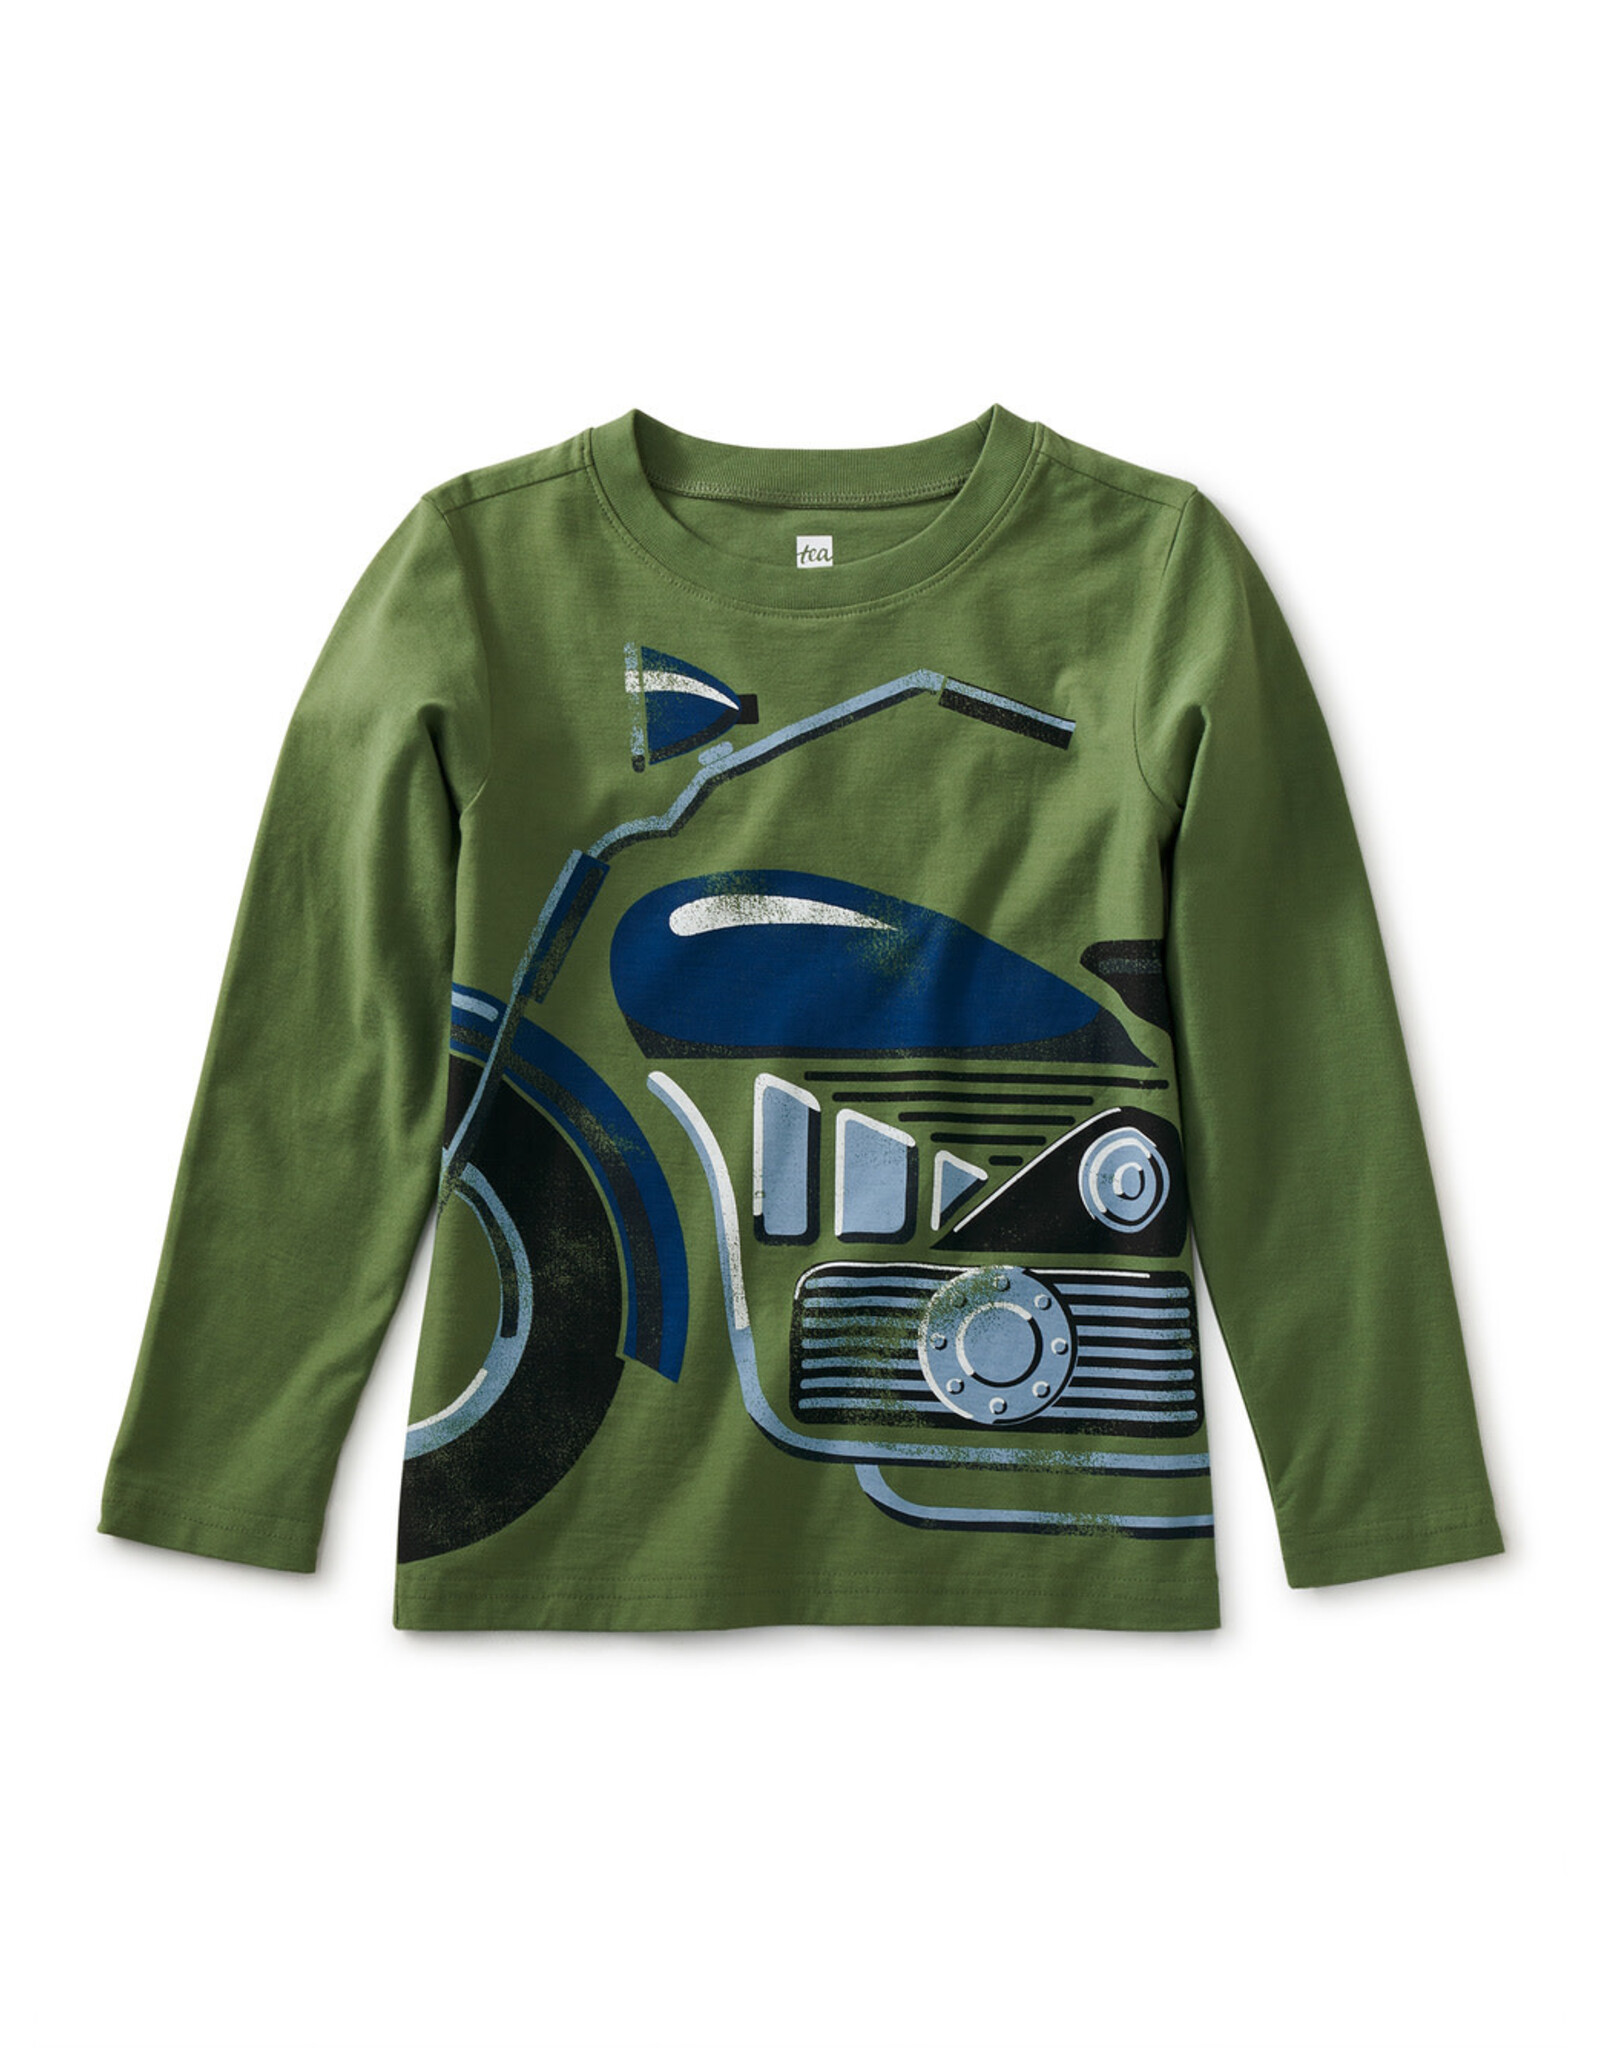 Tea Collection Motorcycle Graphic Tee